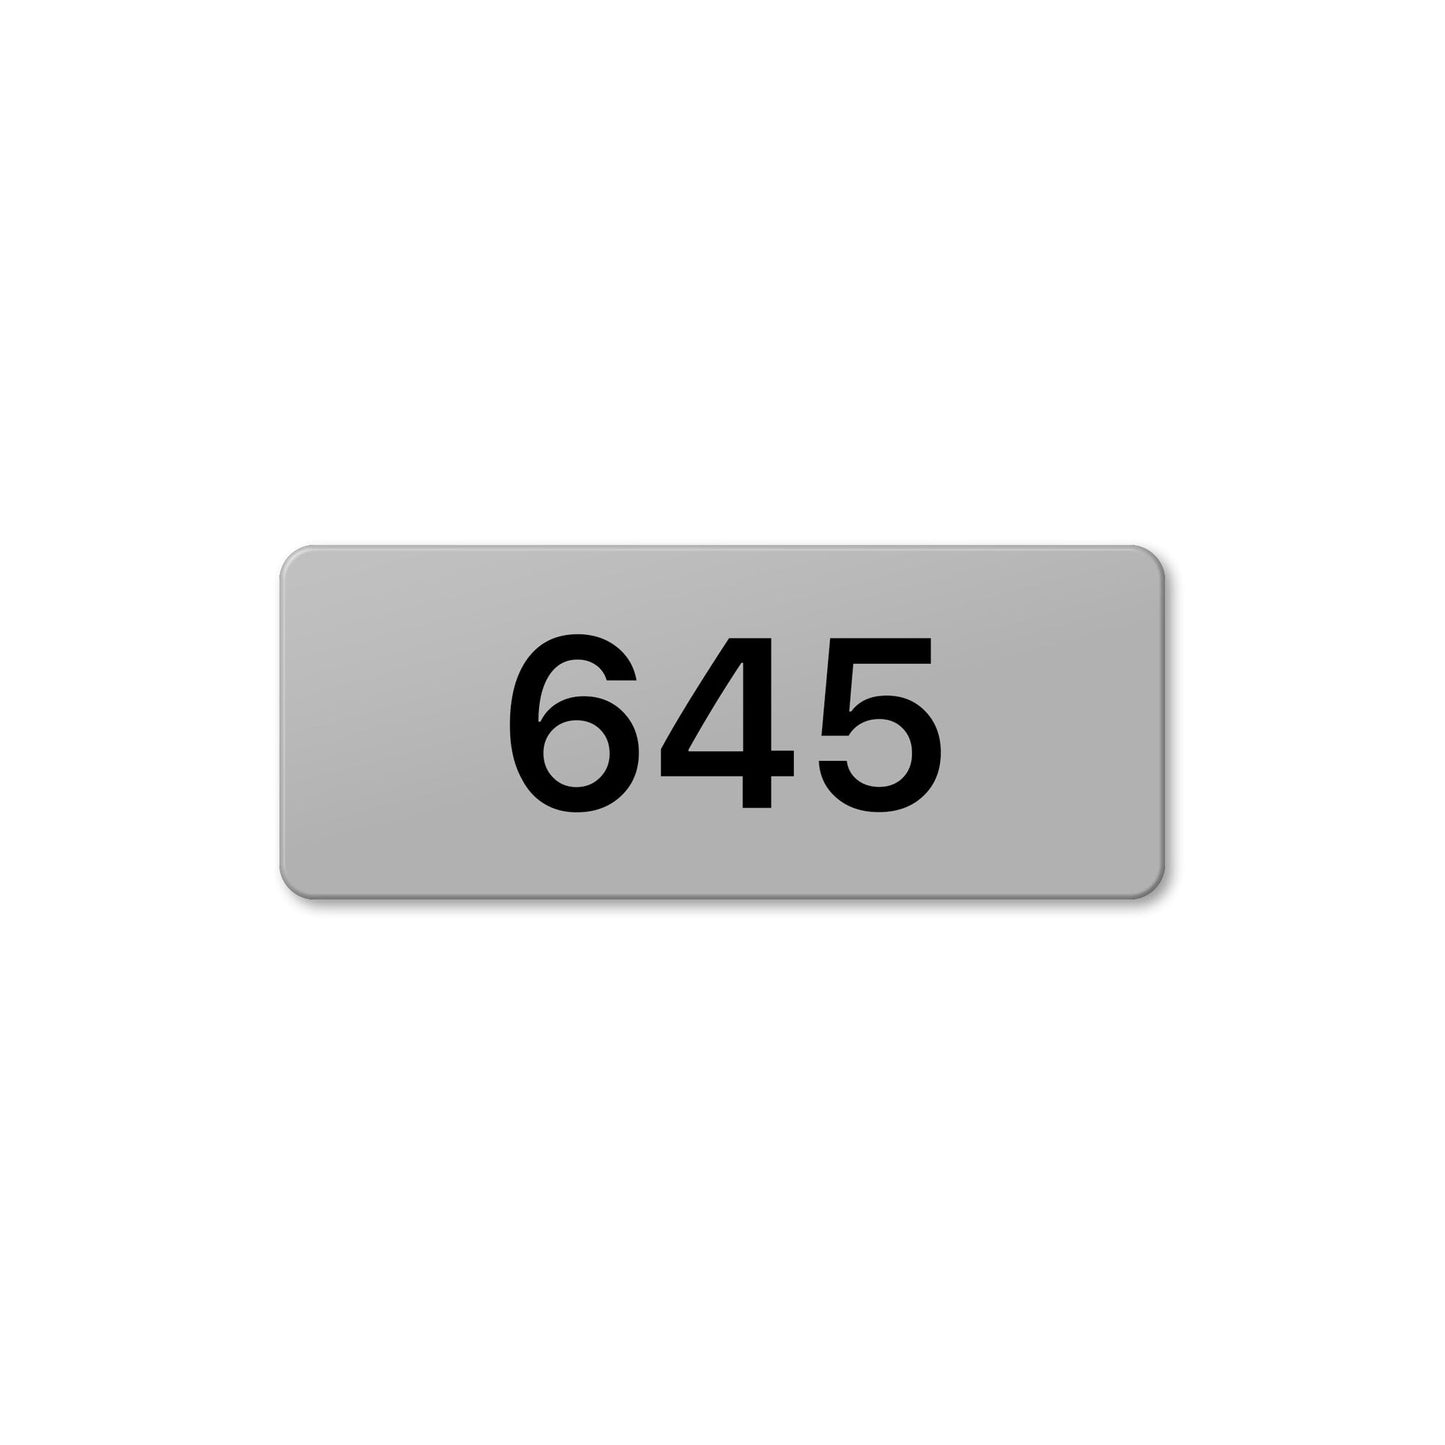 Numeral 645